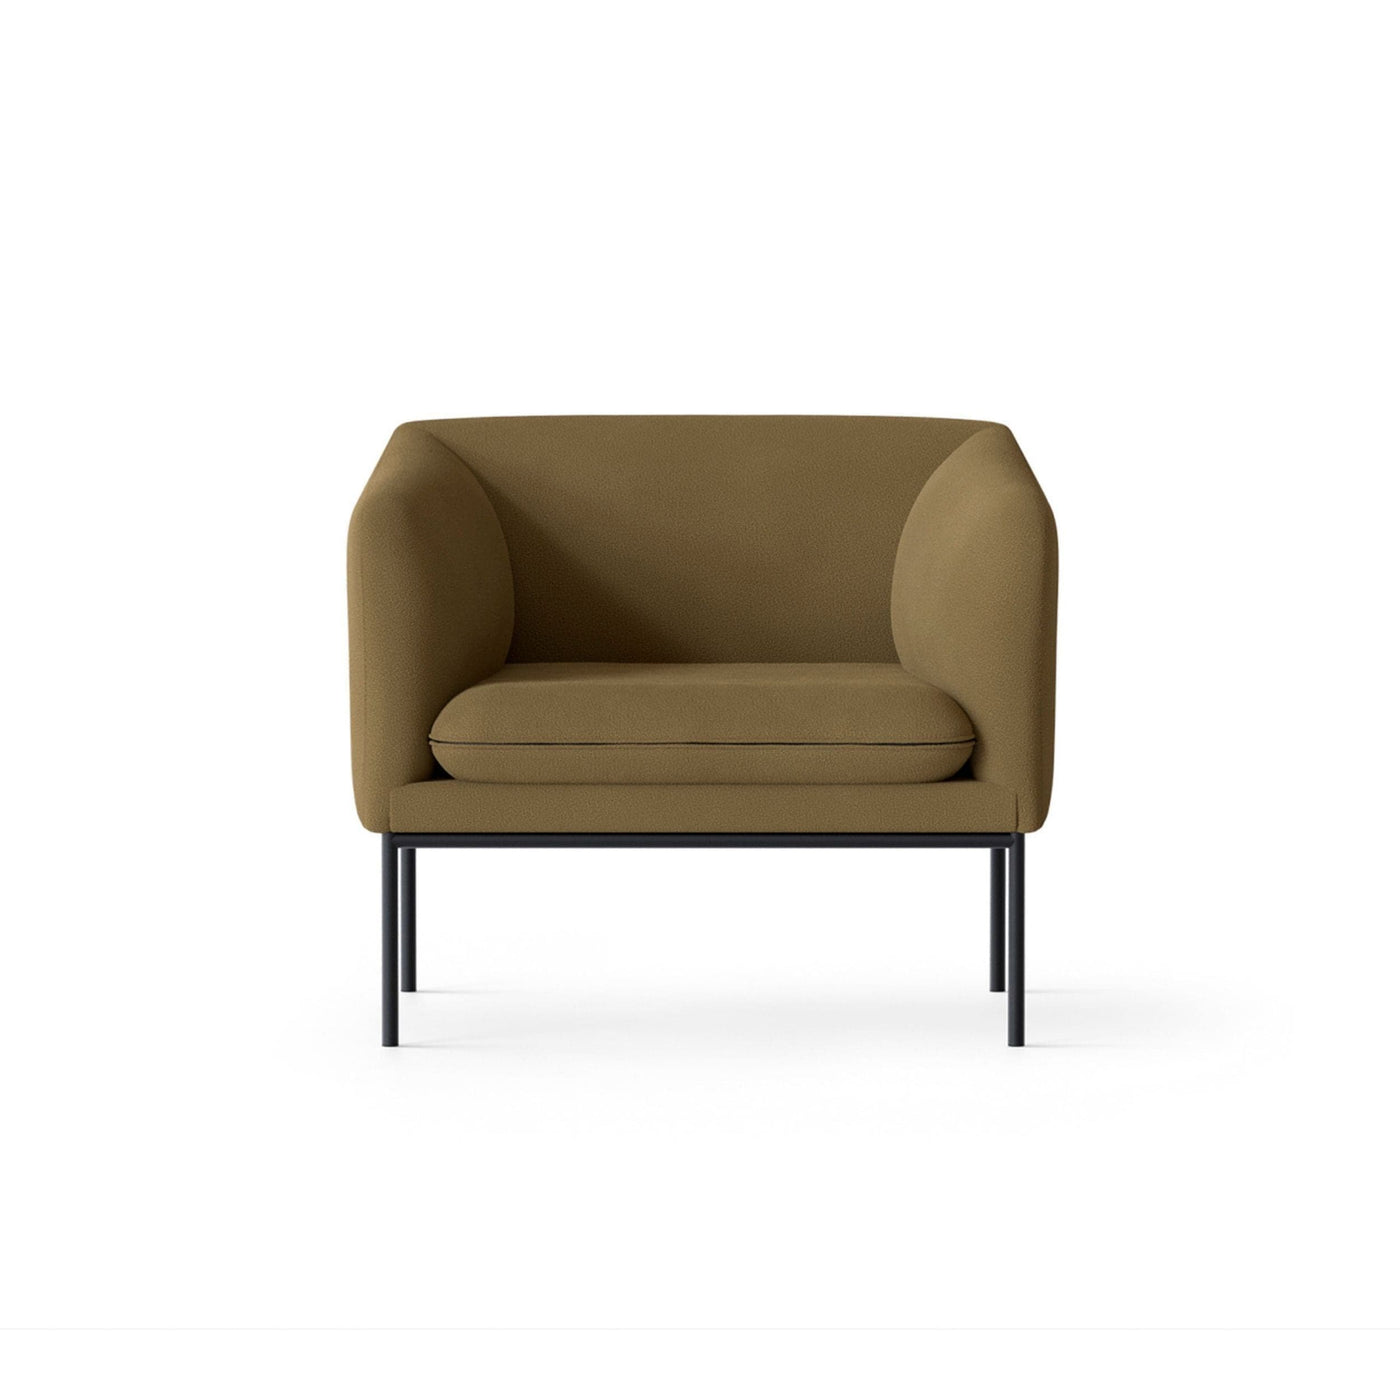 Ferm Living Turn 1 seater with black frame. Shop online at someday designs. #colour_tonus-974